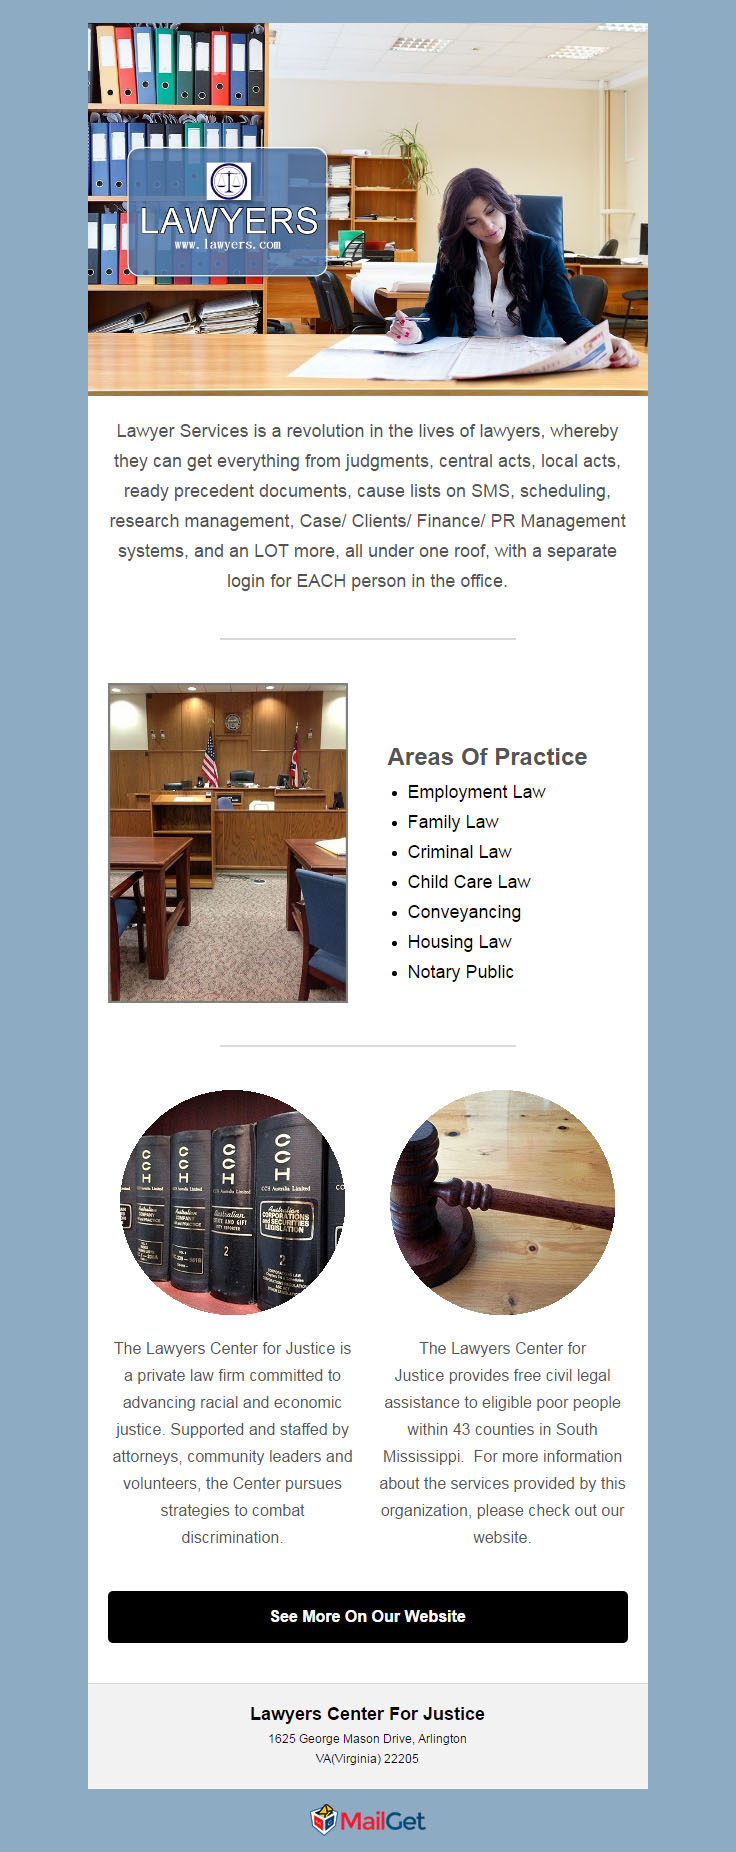 Email Templates For Lawyers & Law Firms2 MailGet